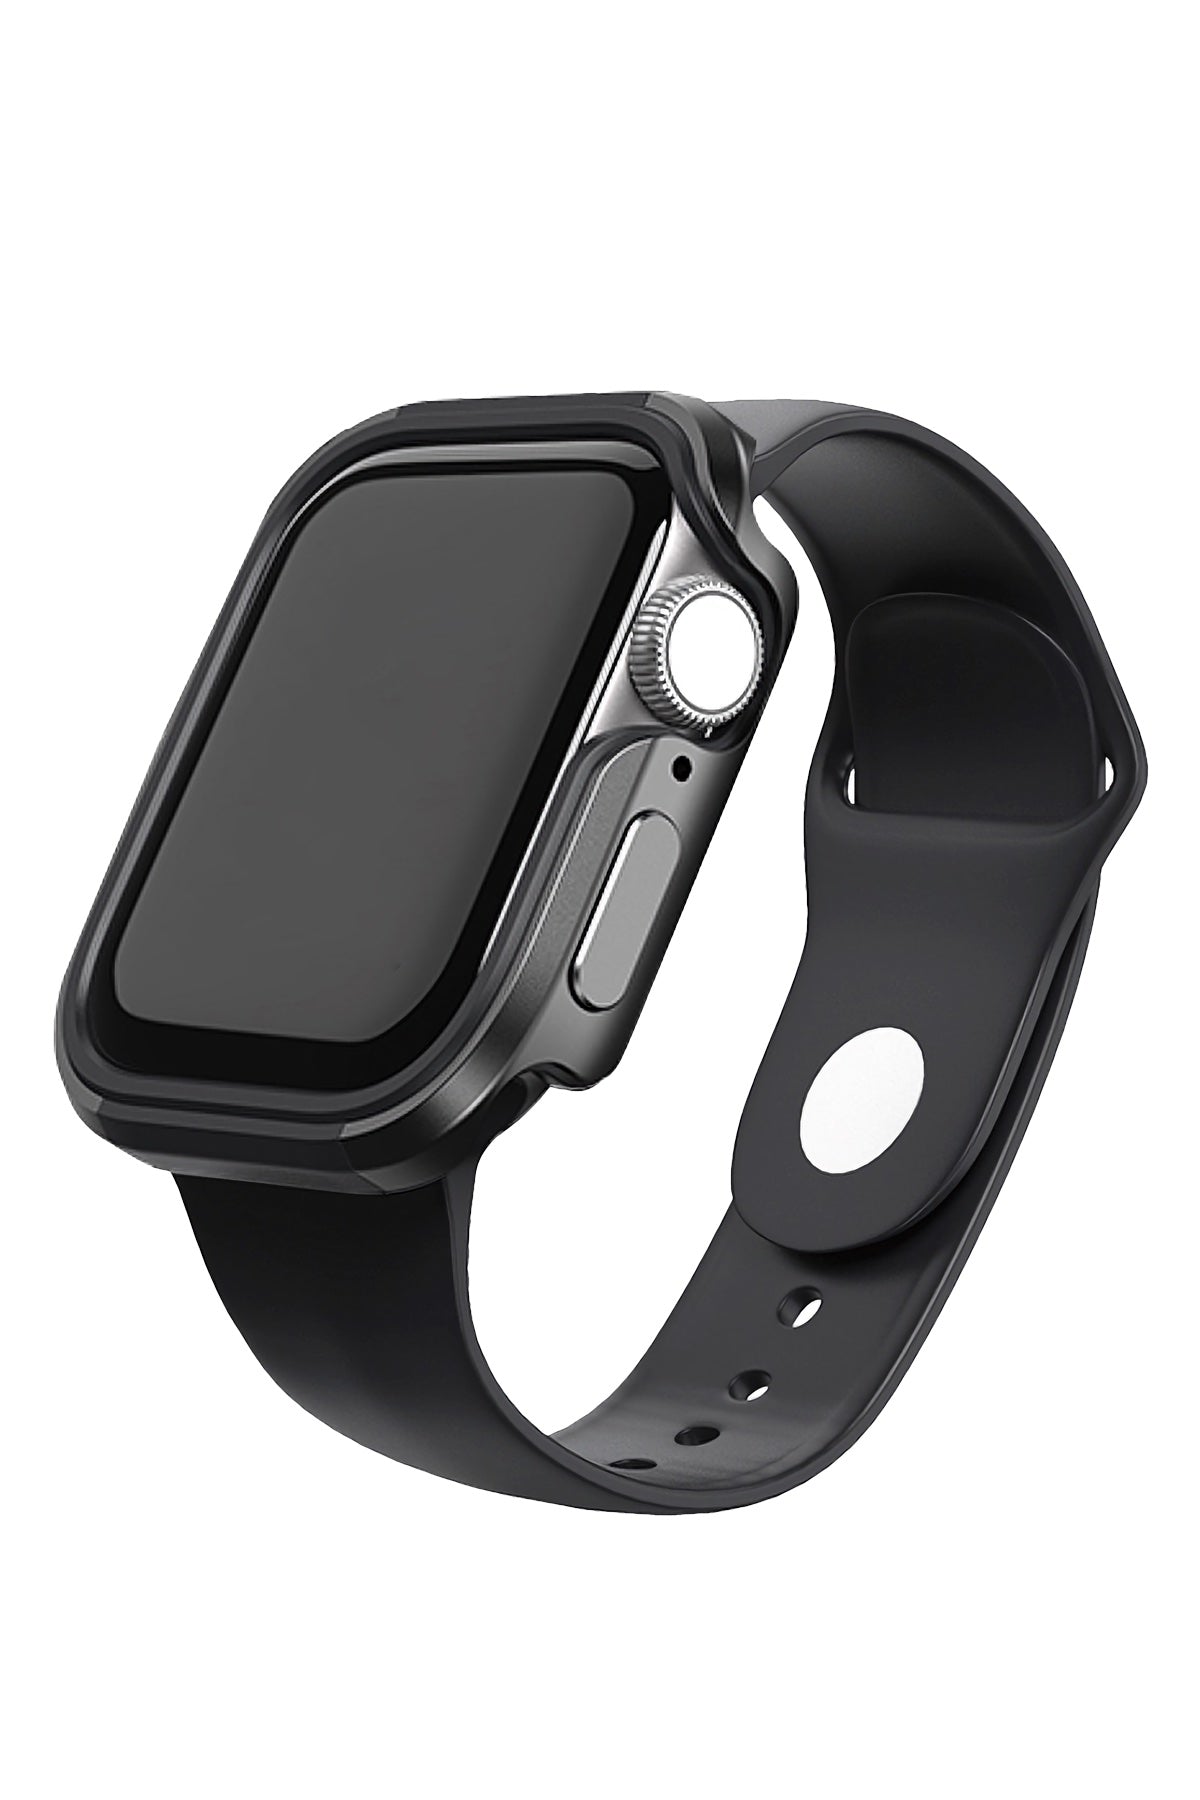 Wiwu Defense Apple Watch Compatible Case Protective Space Gray 